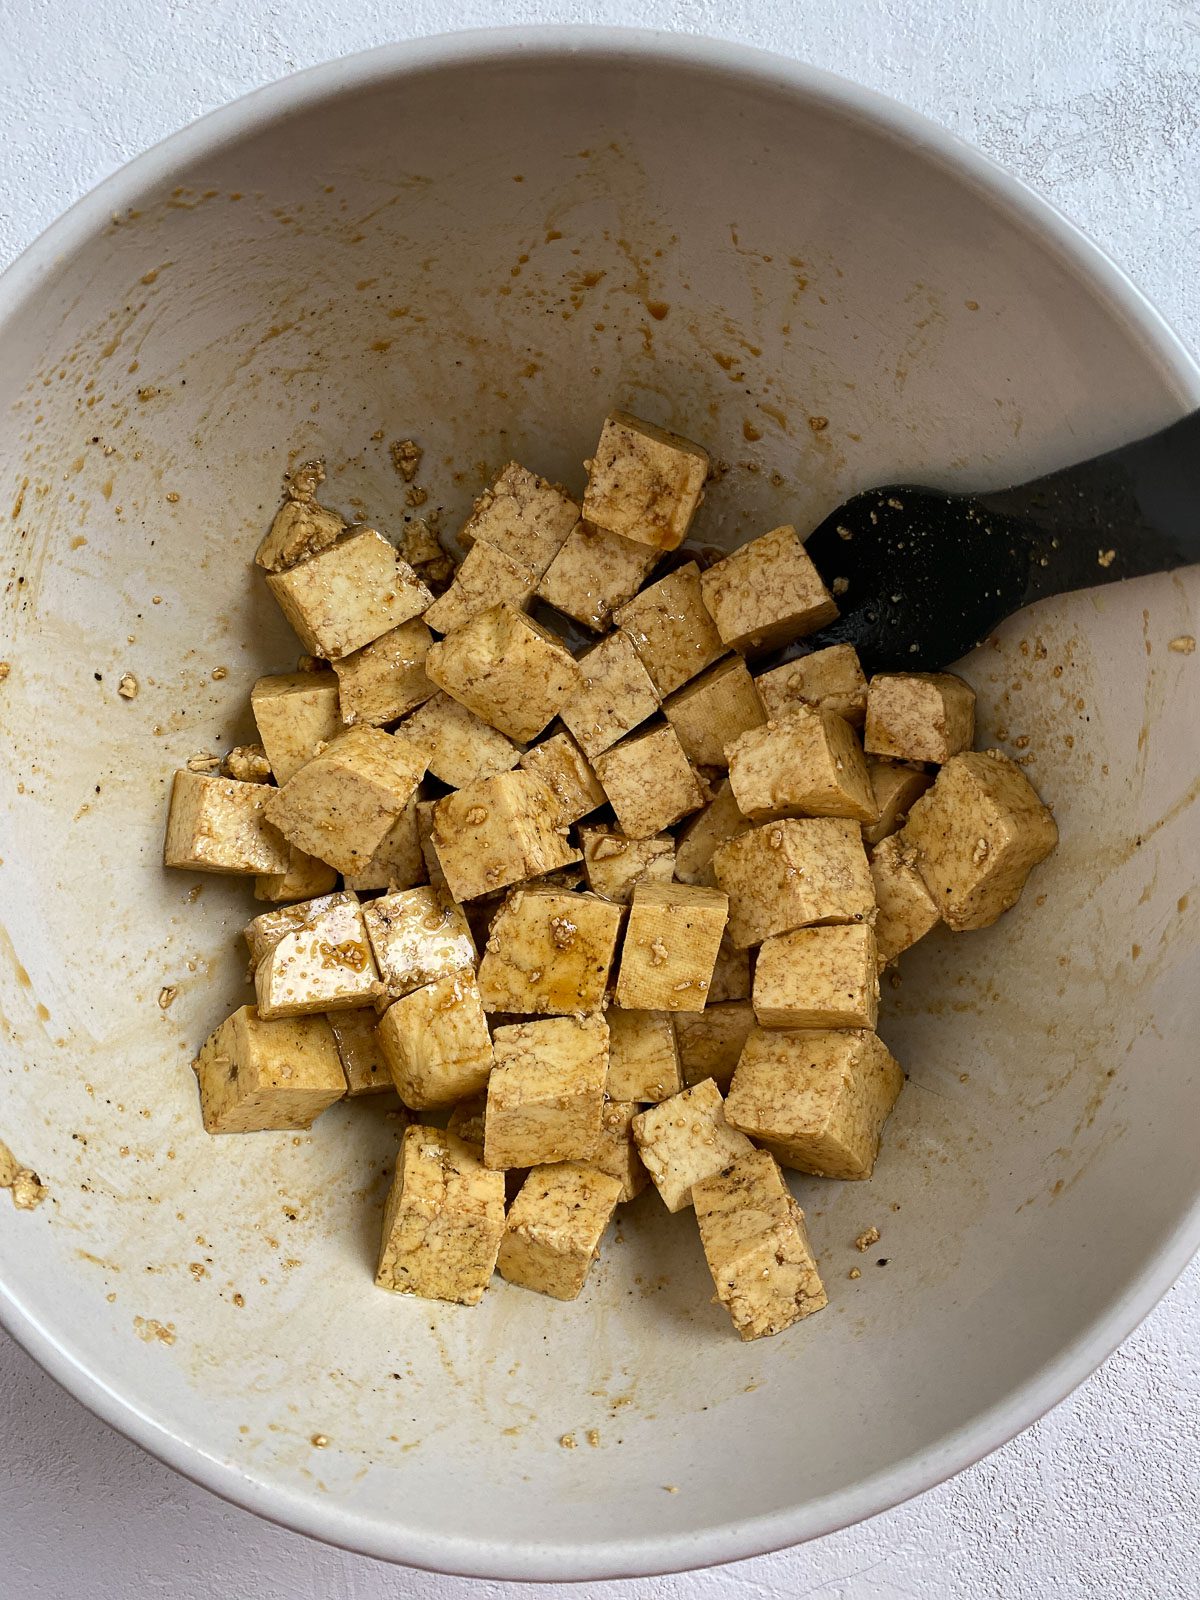 post mixing of soy sauce and oil in a white bowl